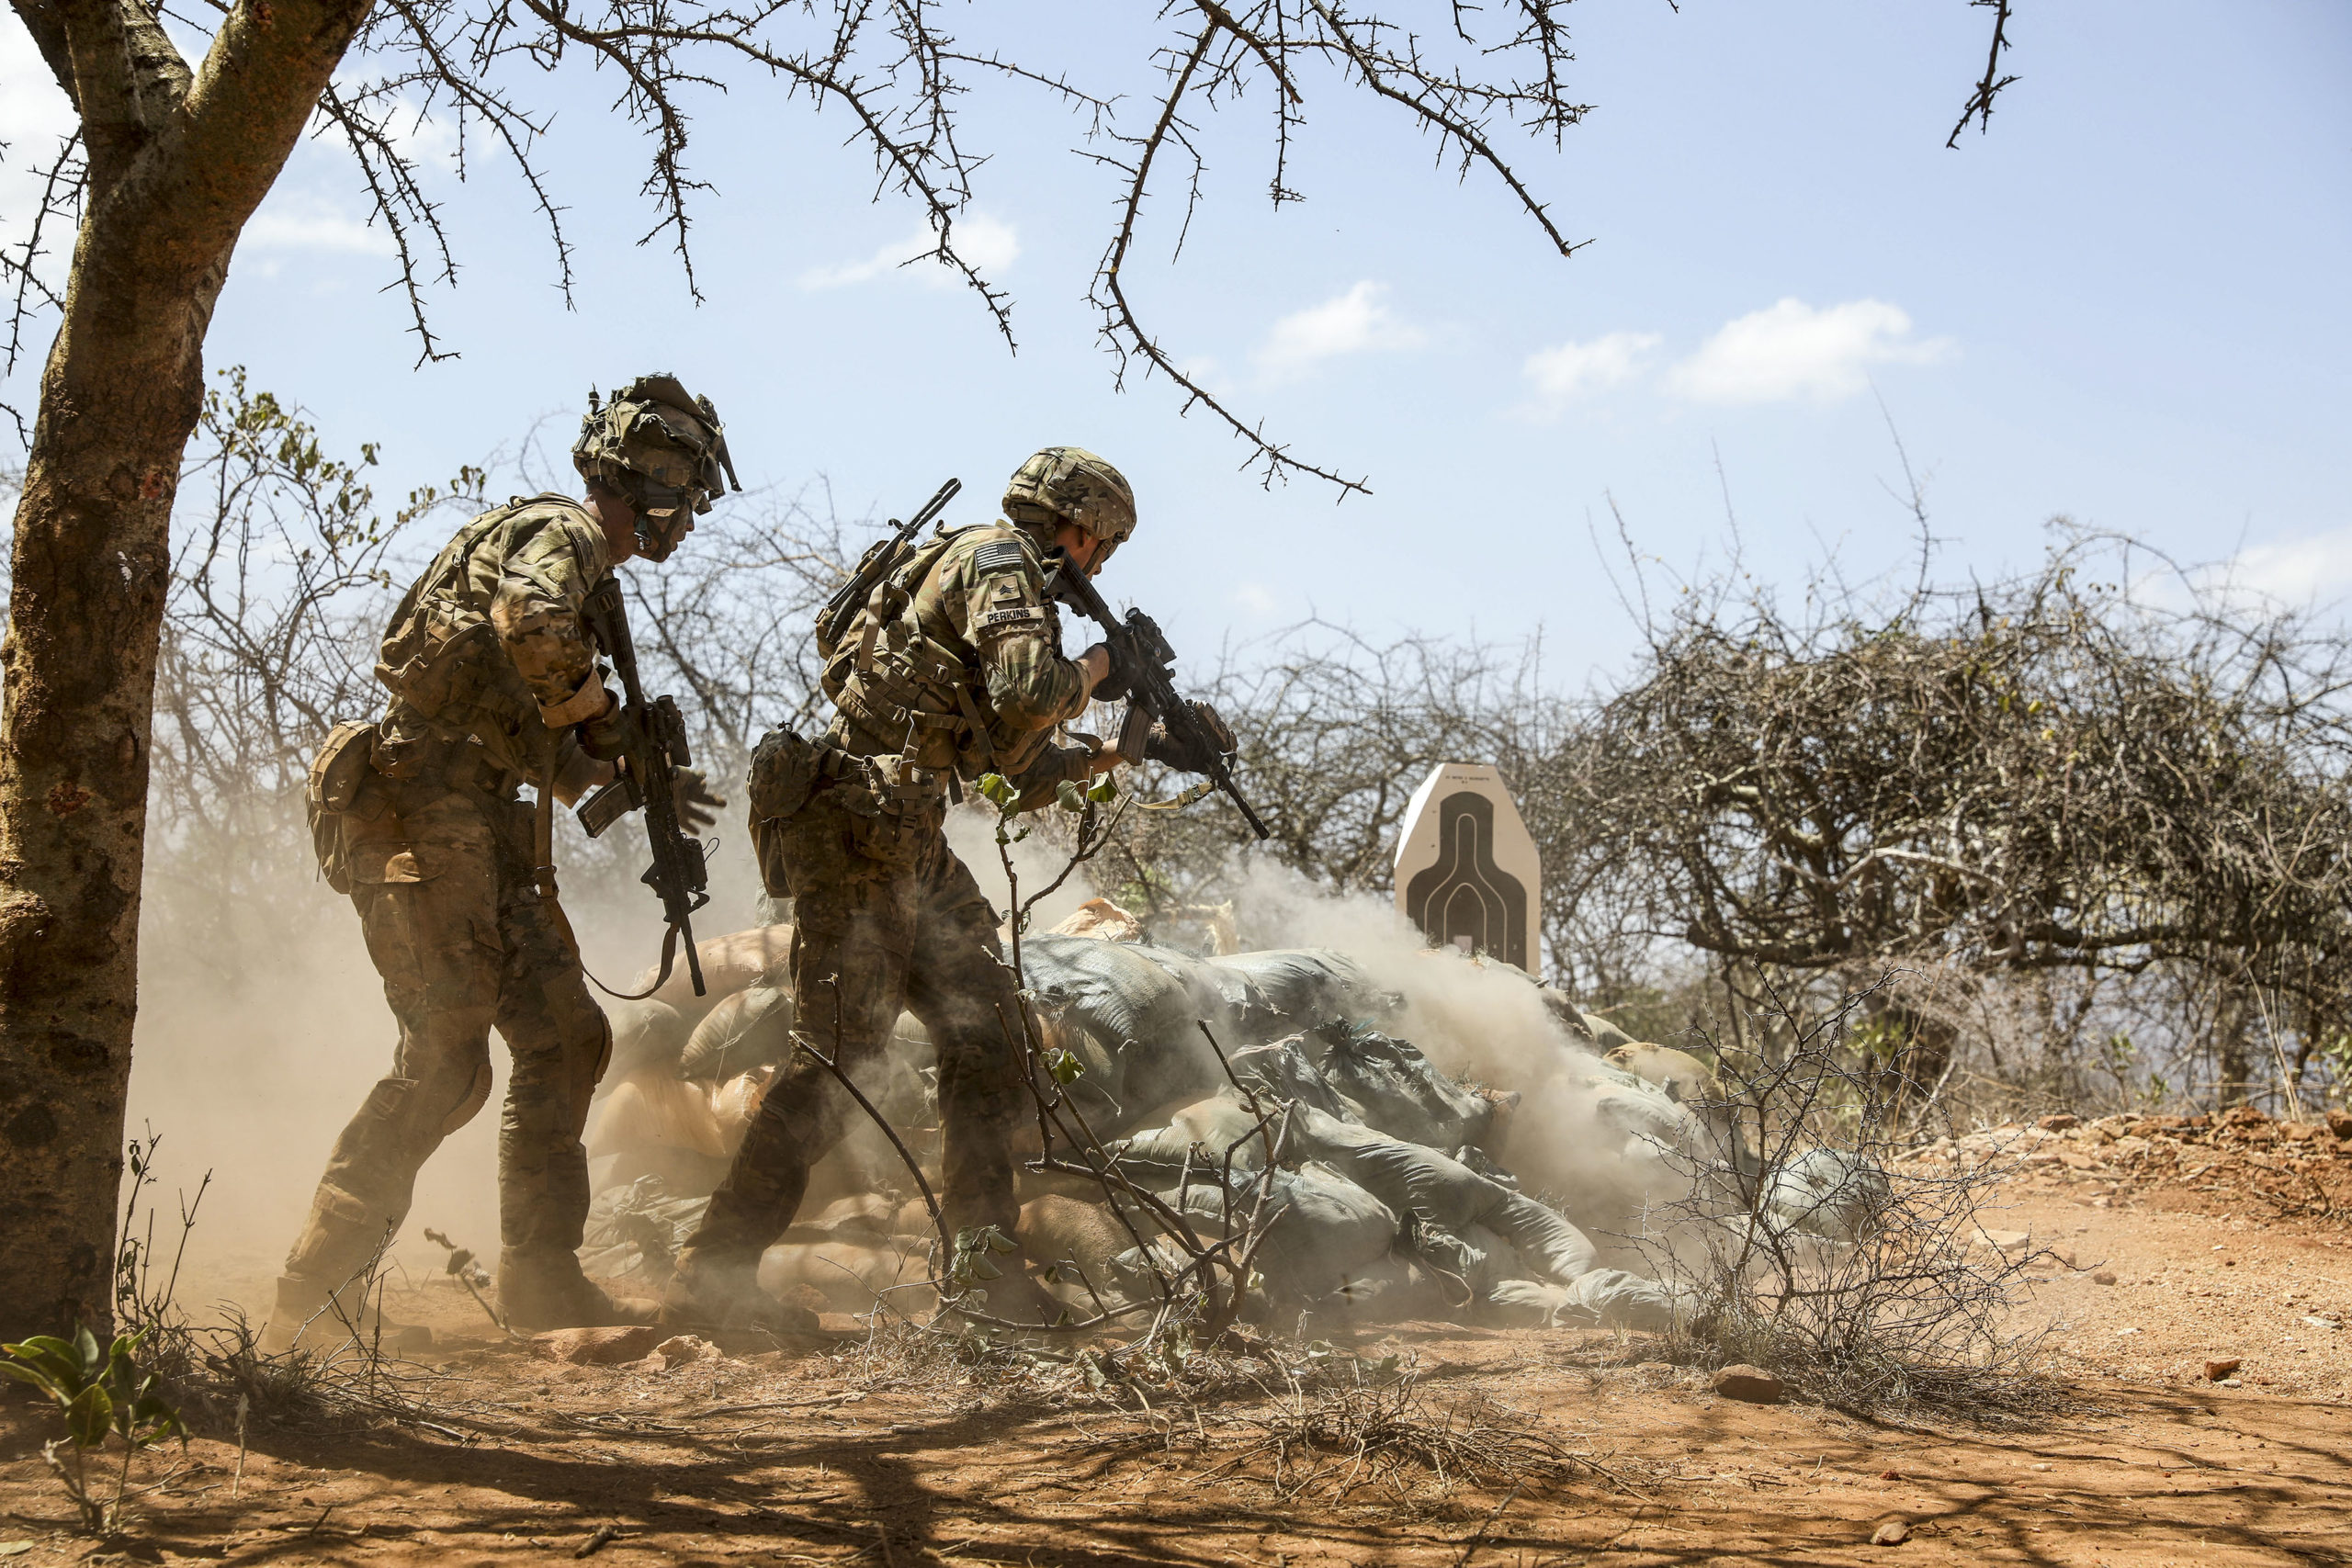 U.S. Army Soldiers with 1st Battalion, 503rd Infantry Regiment, 173rd Airborne Brigade, conduct a live fire training event during Justified Accord on March 9, 2022. Over 800 personnel participated in the exercise representing the United States, Kenya Defence Forces, allied nations and partners / credit: U.S. Army Sgt. N.W. Huertas